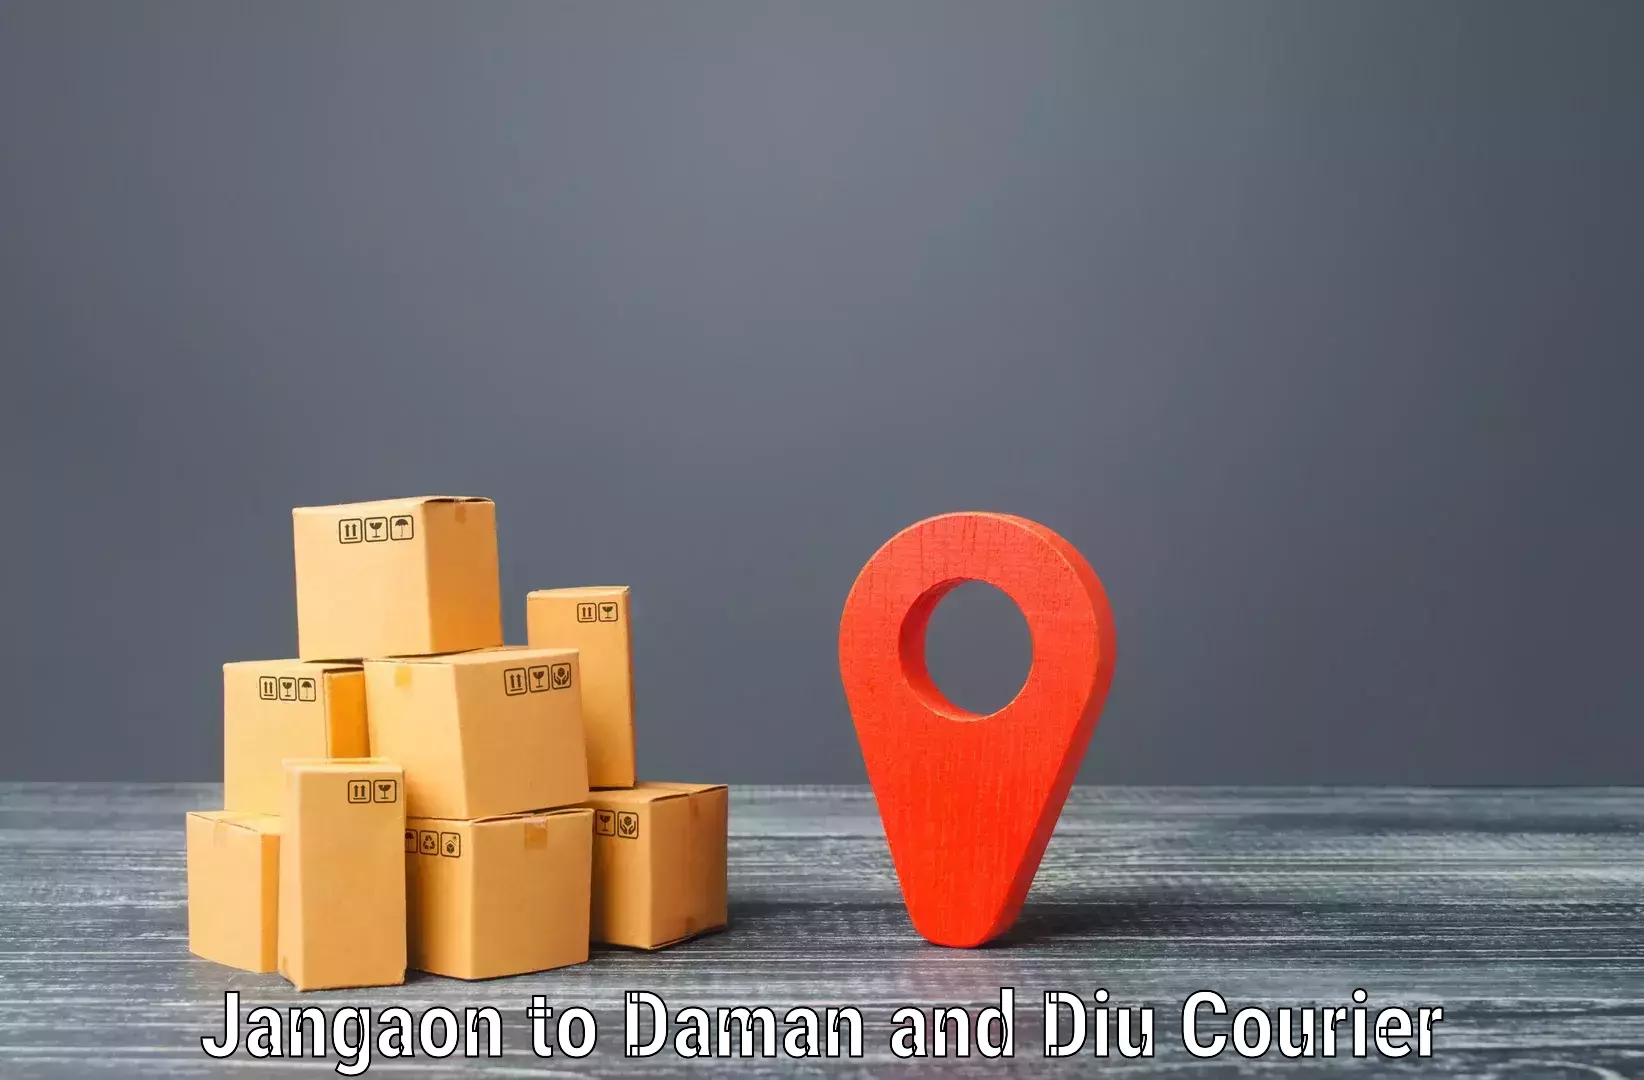 End-to-end delivery Jangaon to Daman and Diu